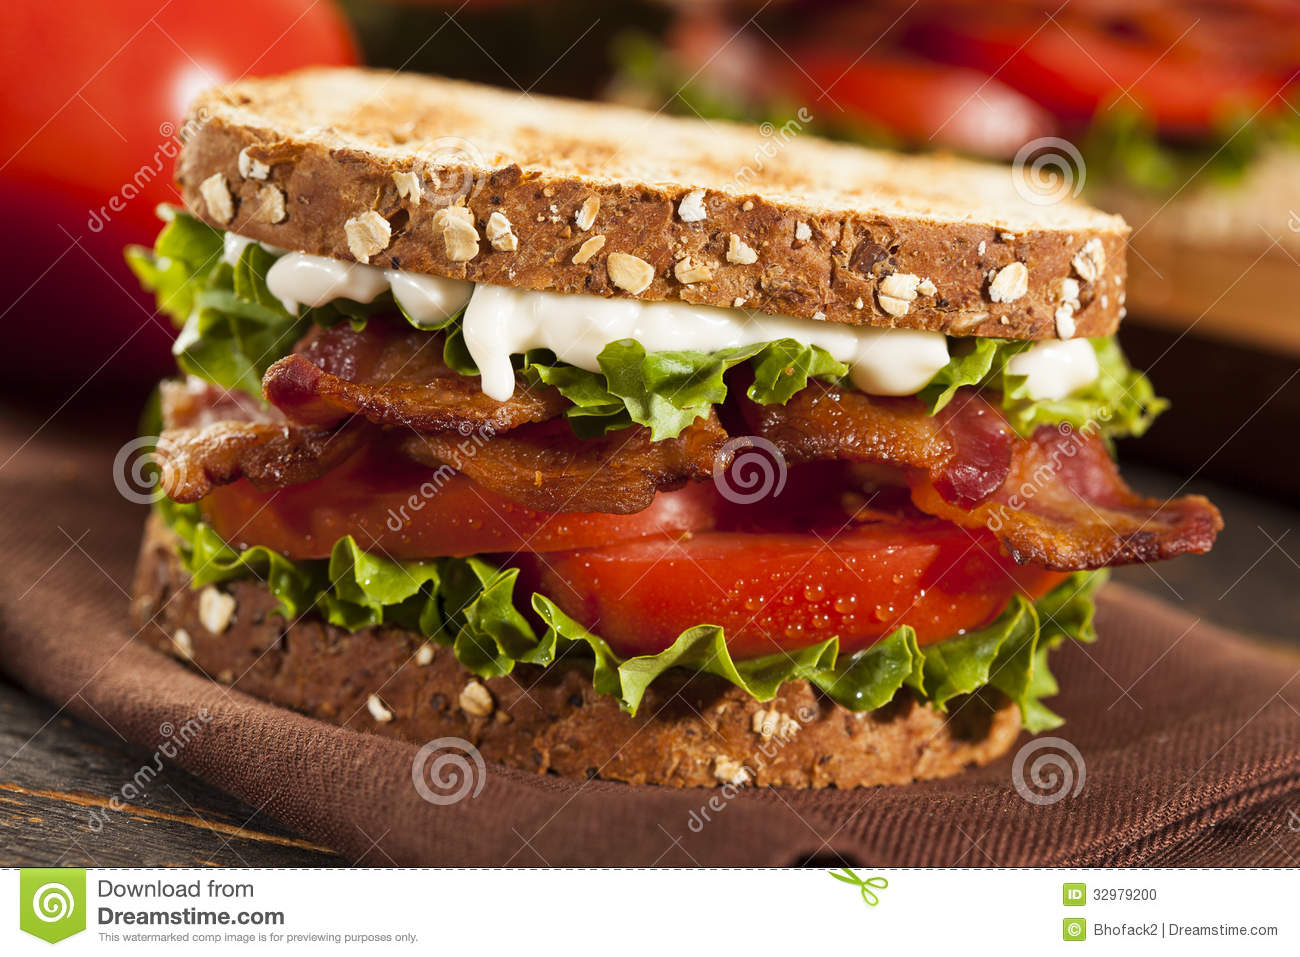 Fresh Homemade Blt Sandwich With Bacon Lettuce And Tomato 